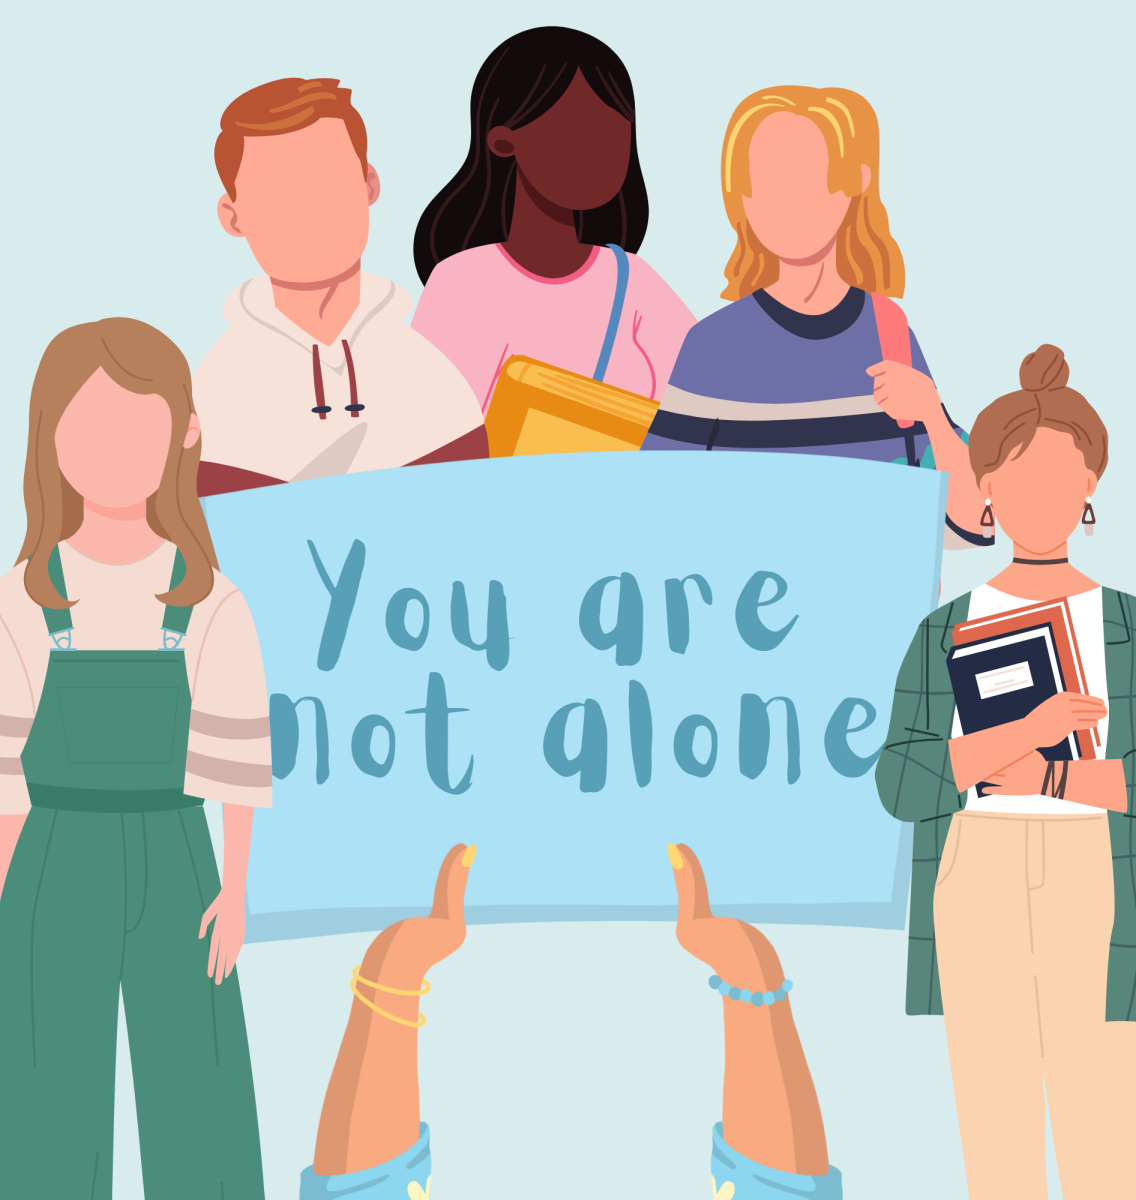 Never+alone%3A+Students+who+struggle+from+sexual+violence+and+rape+are+never+alone.+No+matter+how+hard+the+feelings+are%2C+there+is+always+someone+out+there+who+understands+what+one+is+going+through.